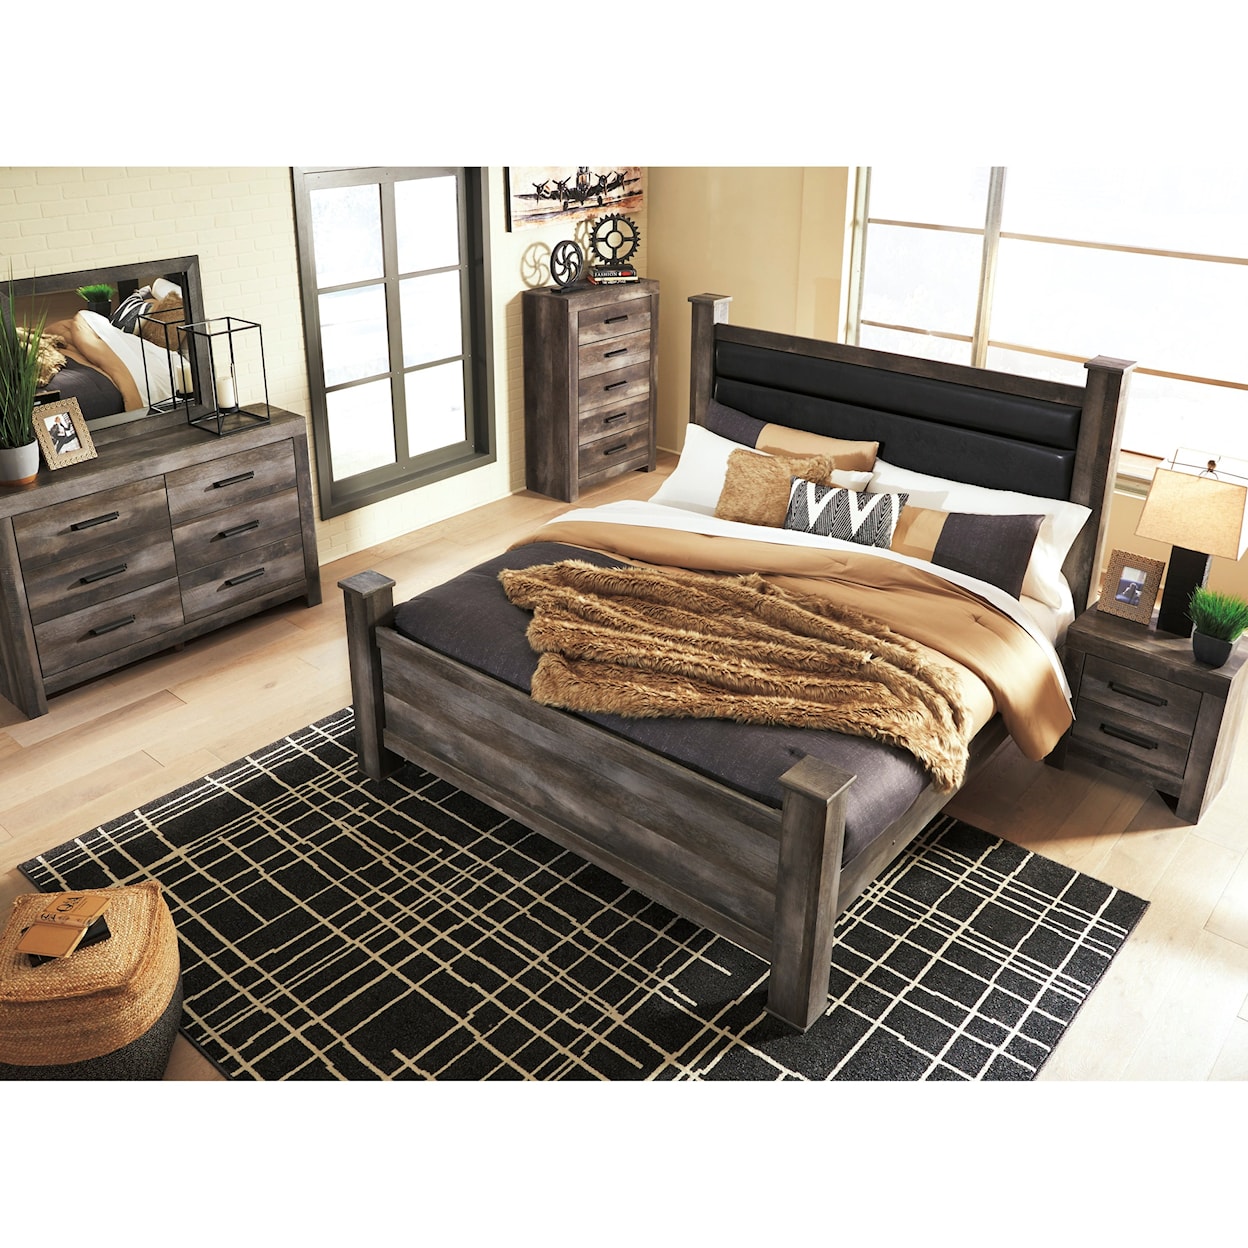 Signature Design by Ashley Wynnlow King Poster Bed